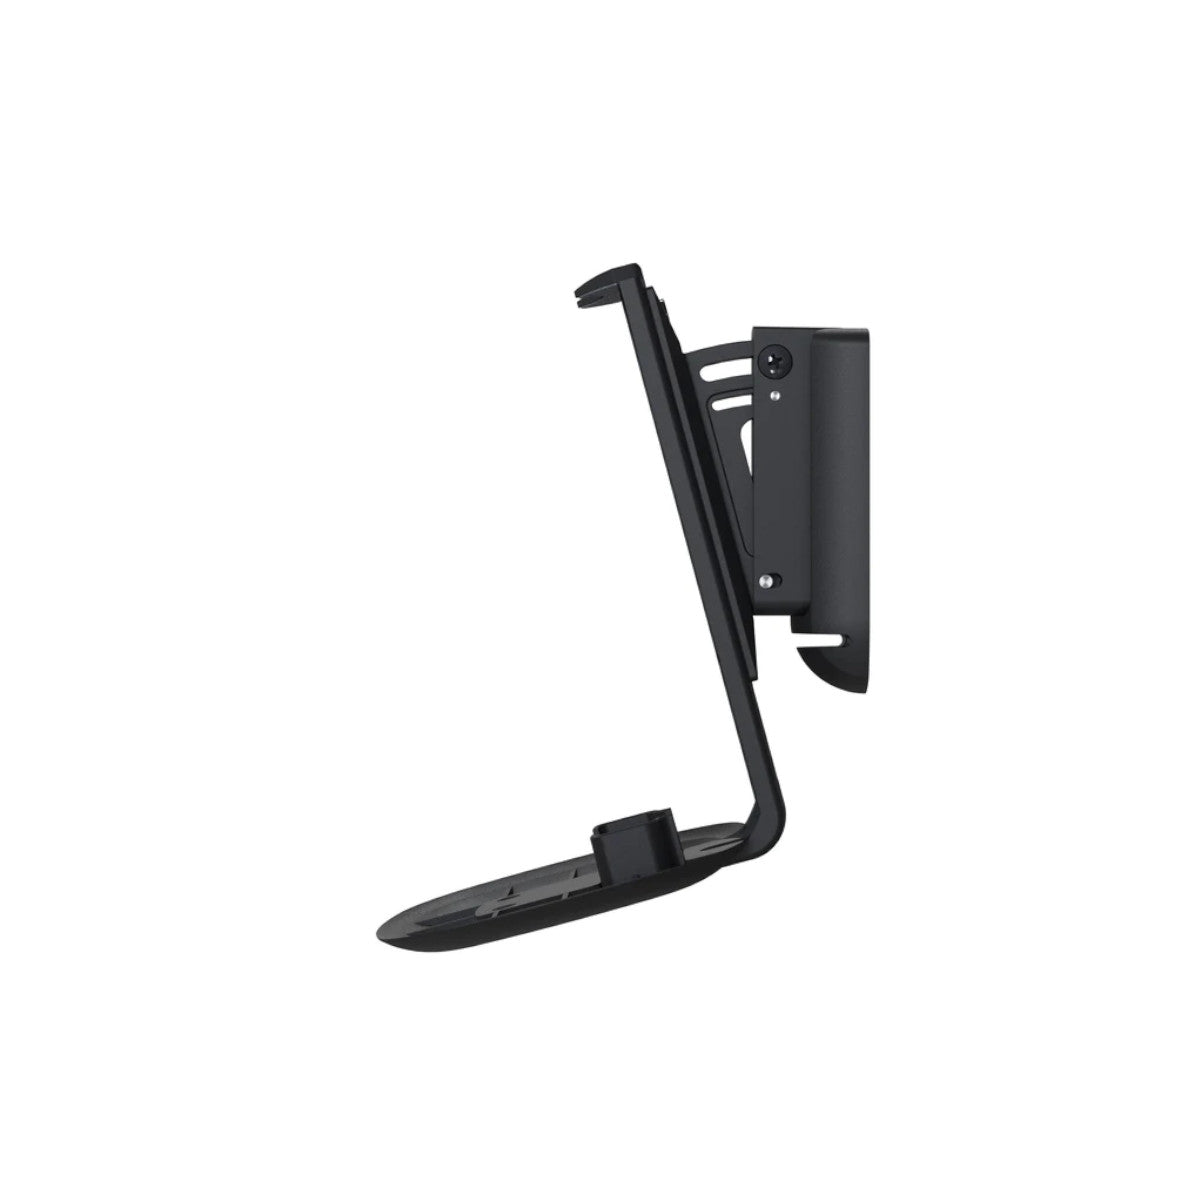 Sonos Flexson Wall Mount for Sonos One and One SL (Black)